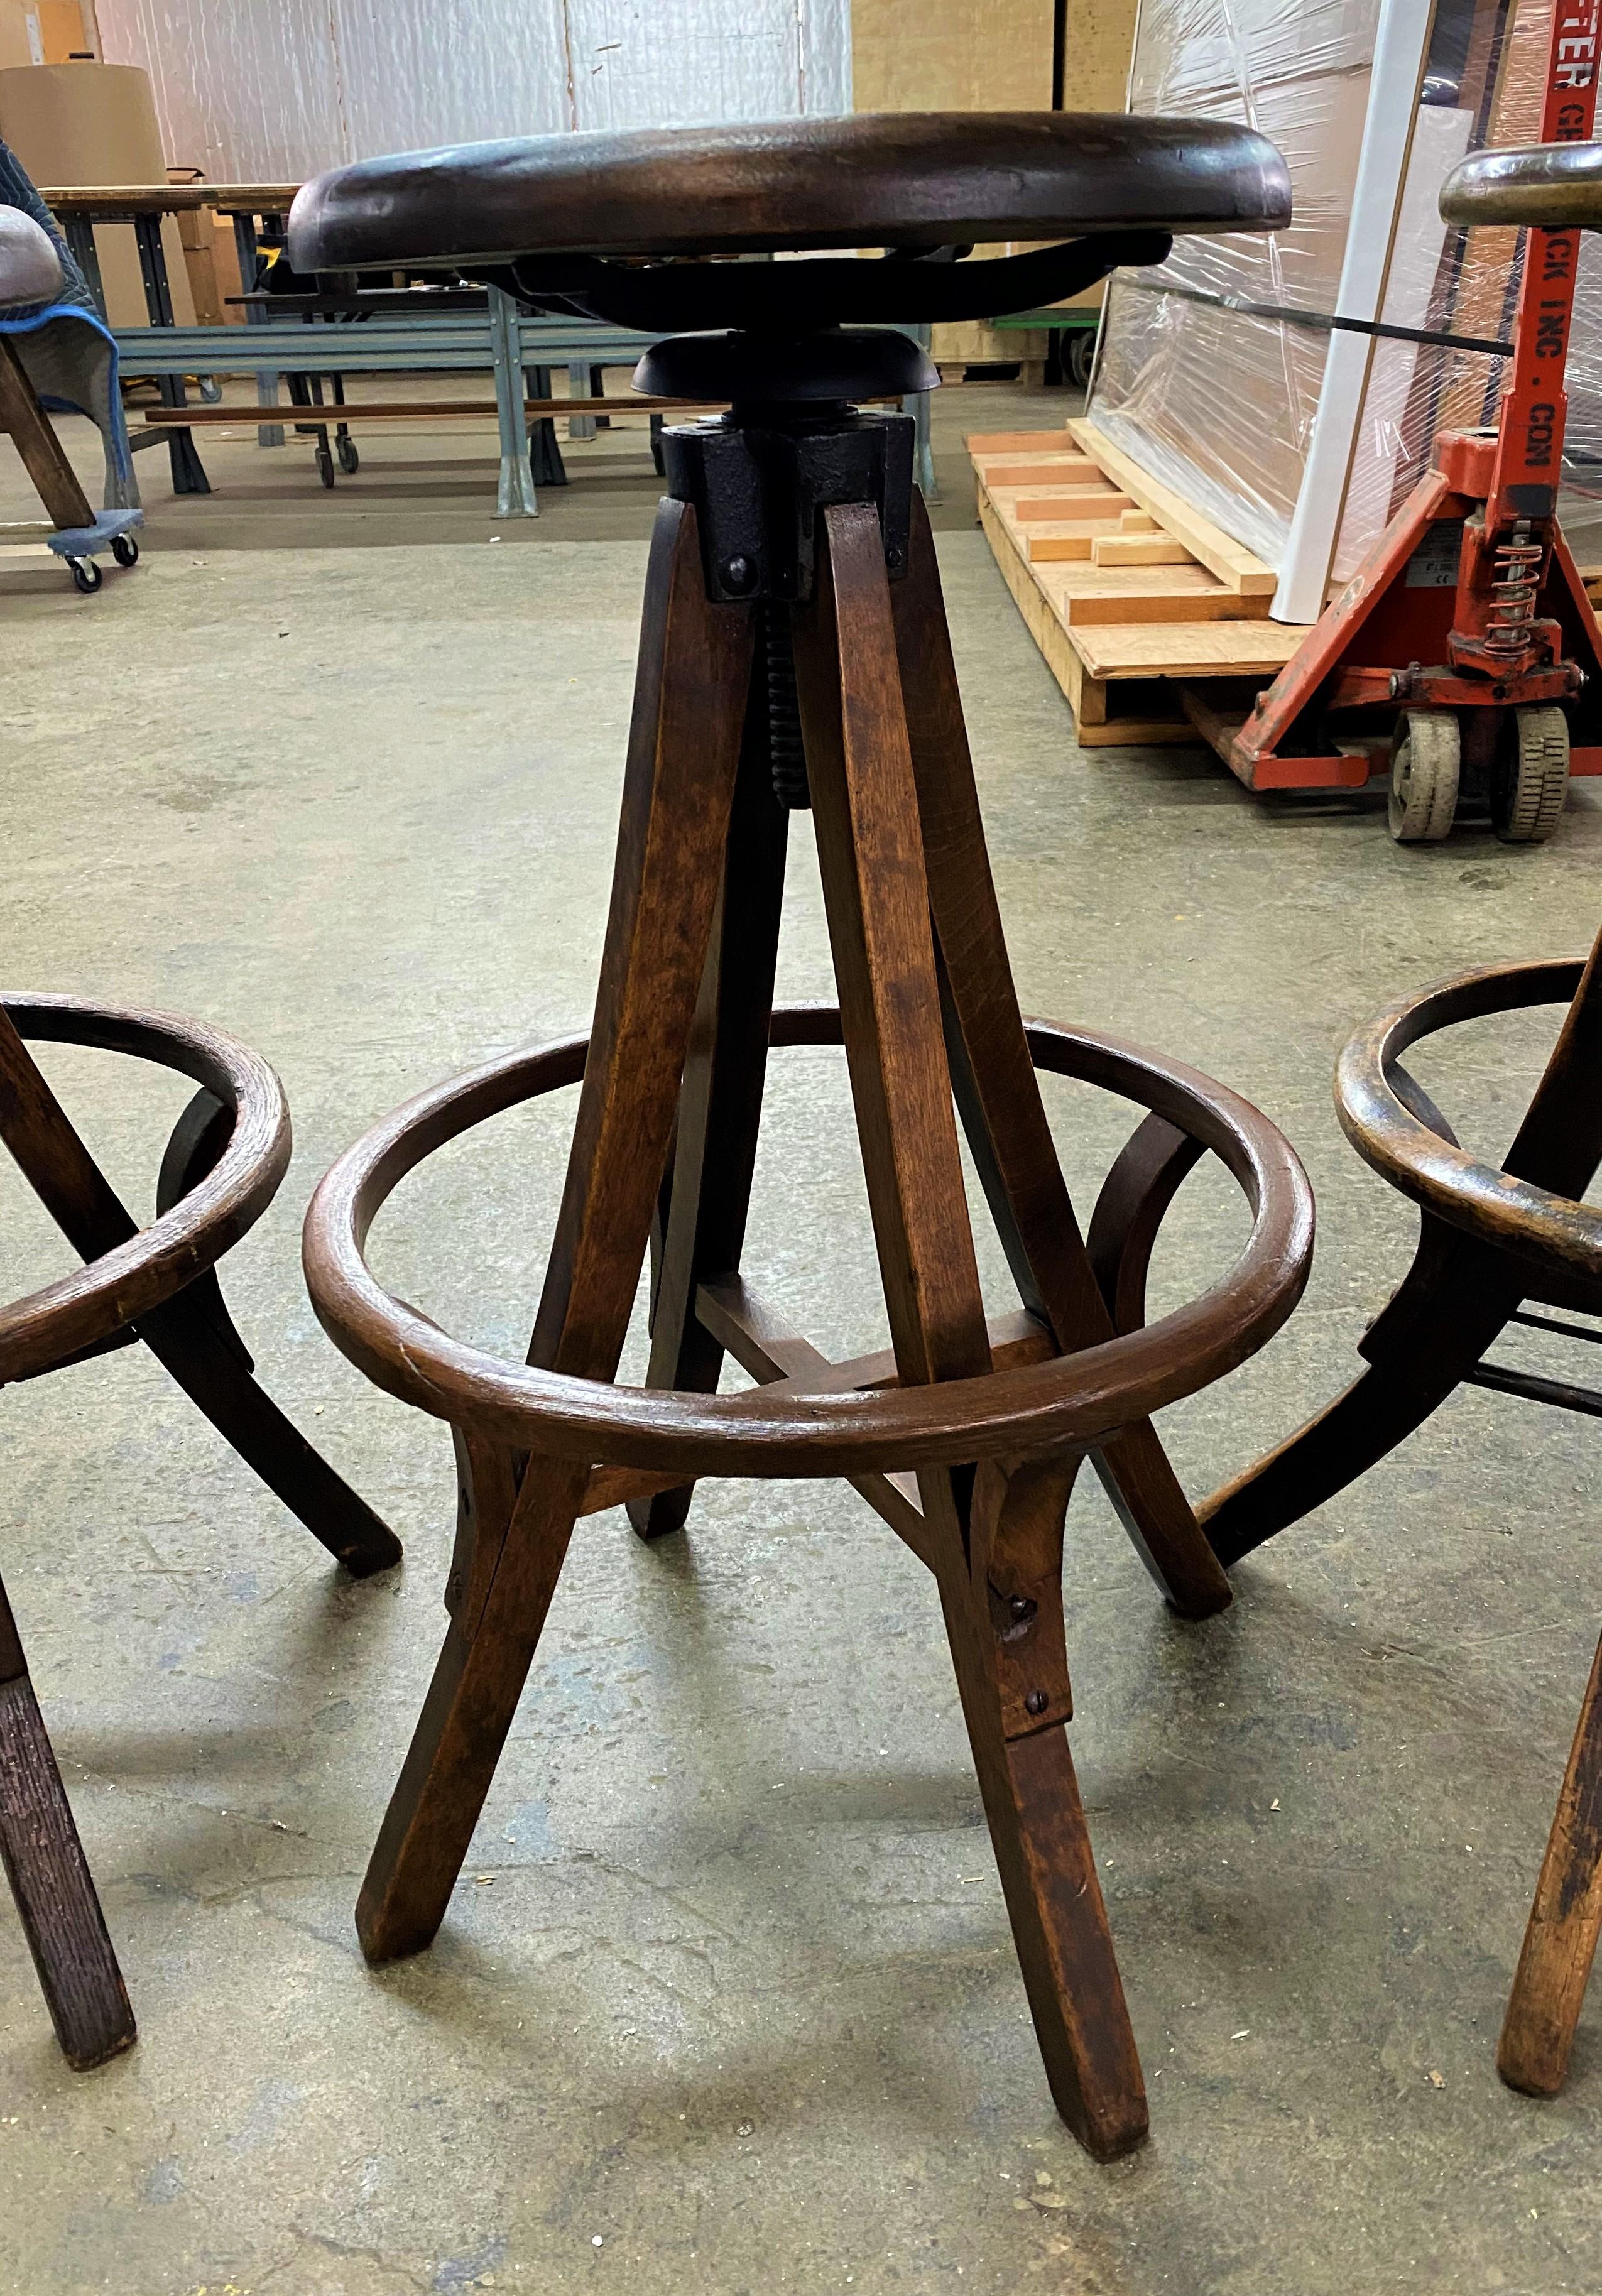 Iron Antique Wooden Drafting Stools